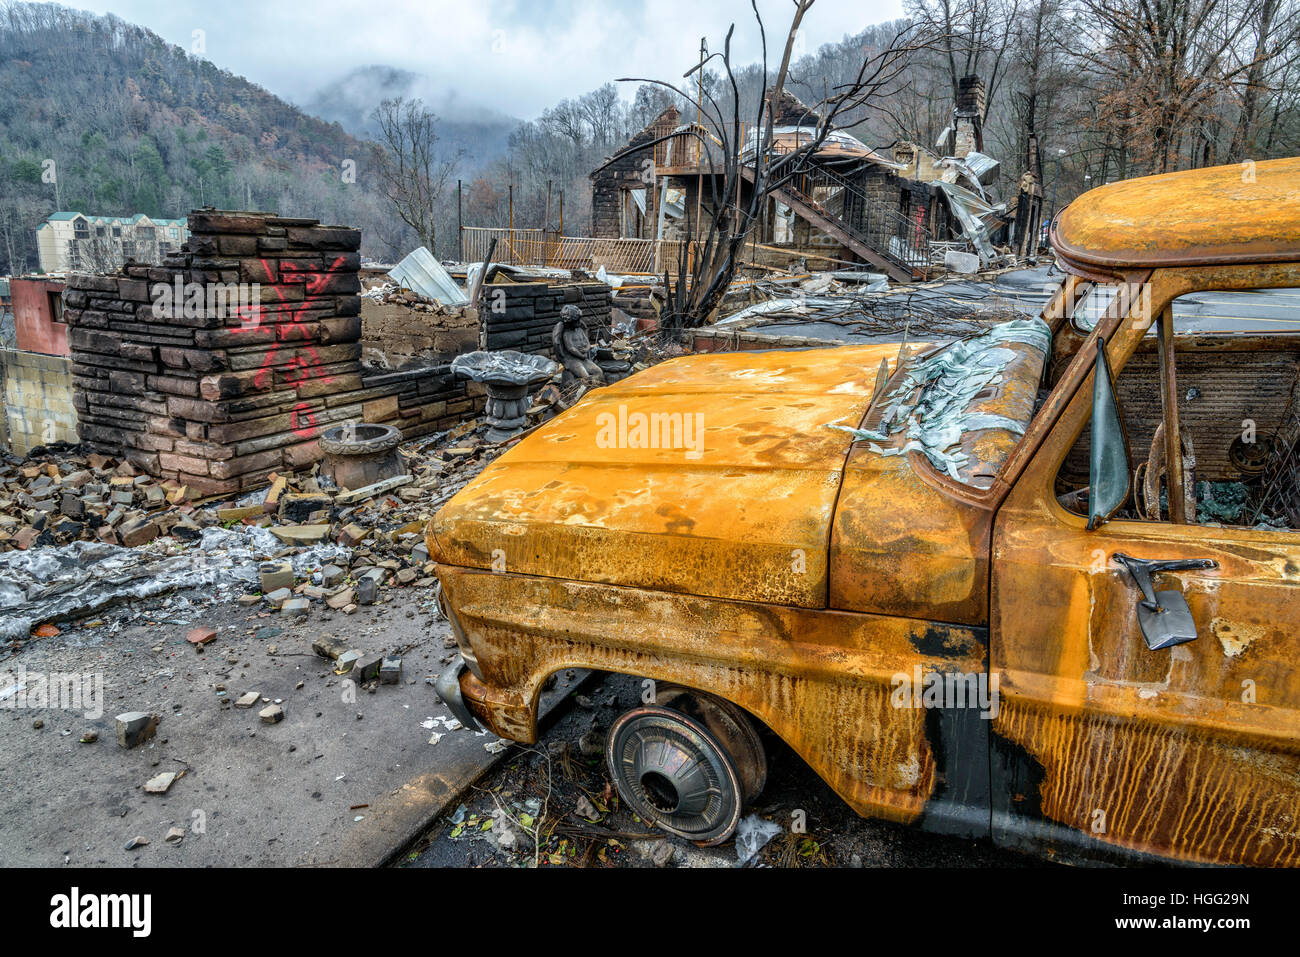 GATLINBURG, TENNESSEE/USA - DECEMBER 14, 2016: A cremated truck and a burned structure remain after a forest fire burned part of Gatlinburg in 2016. Stock Photo